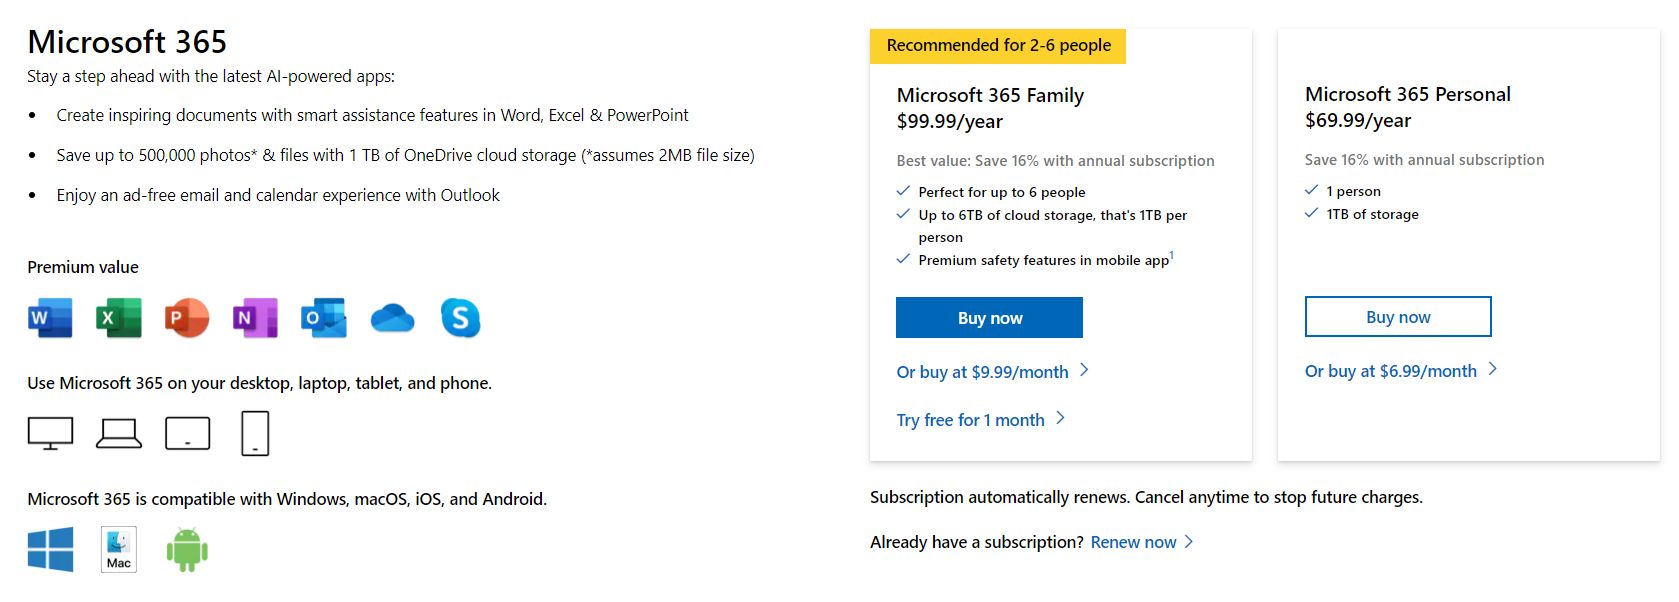 screenshot of Microsoft 365 benefits from the subscription page